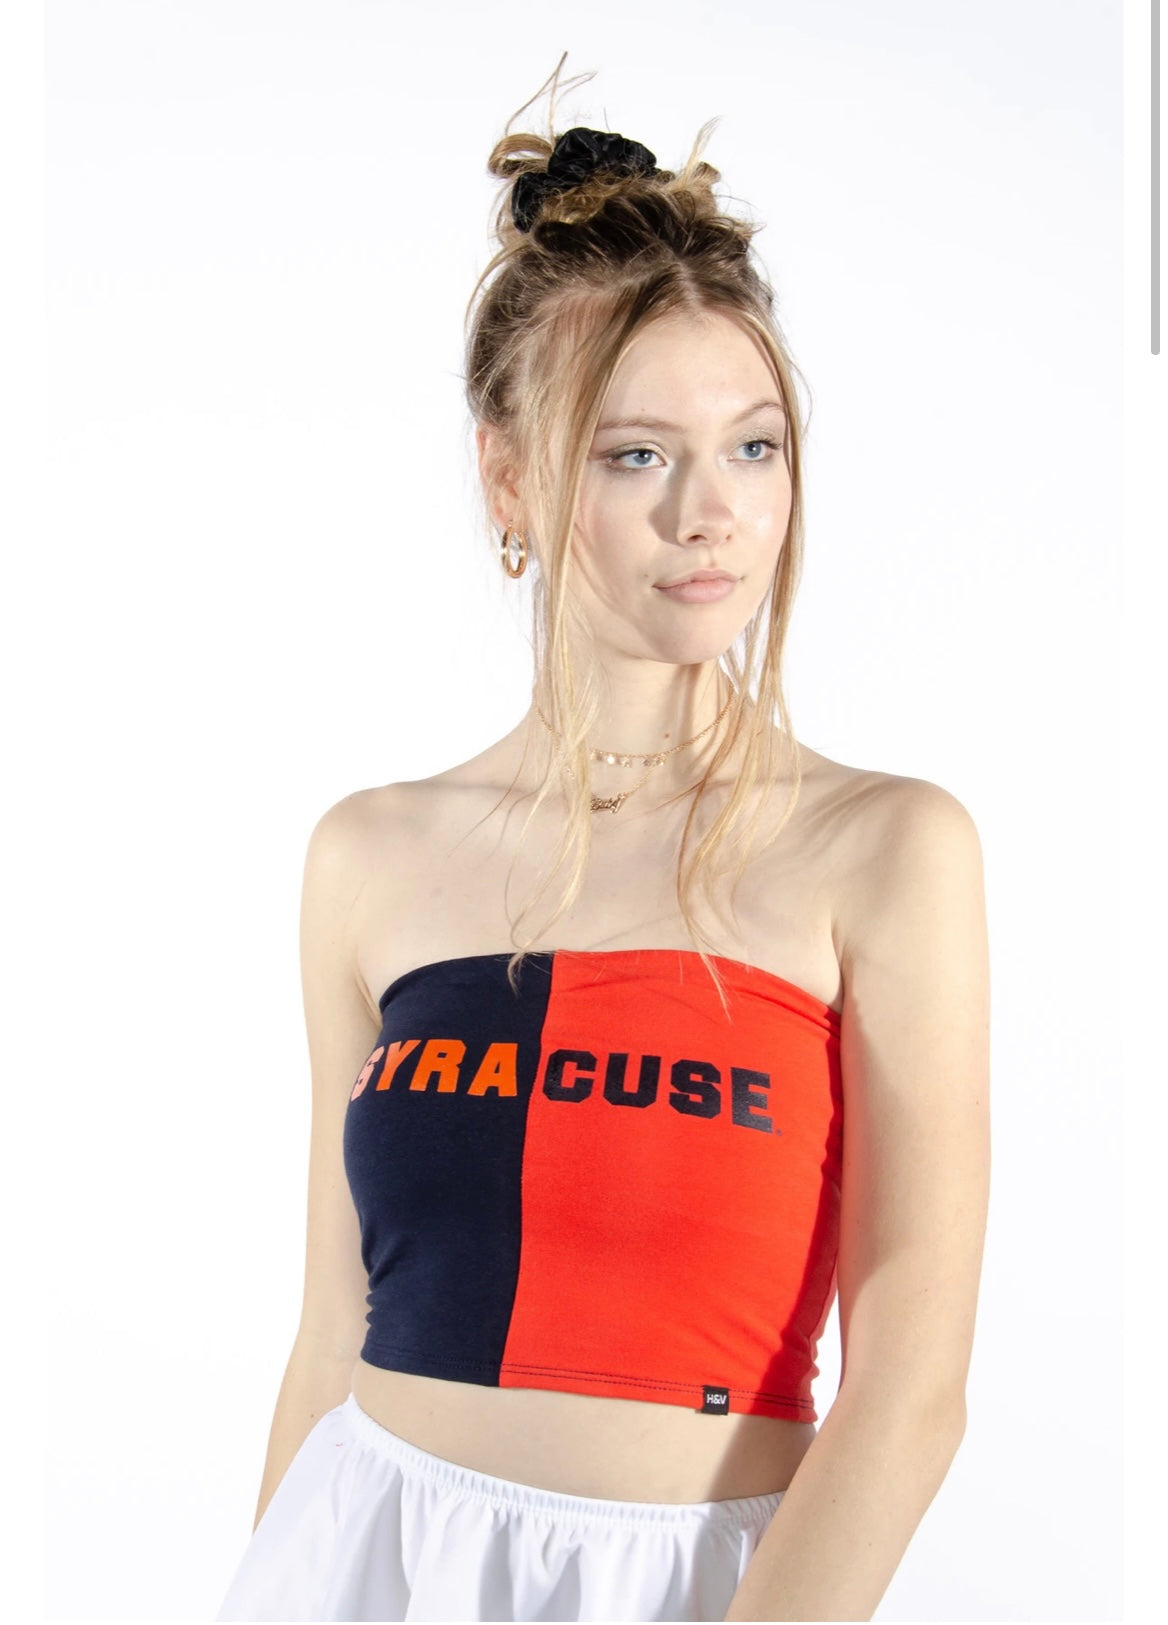 Syracuse Color-Block Tube Top by Hype & Vice